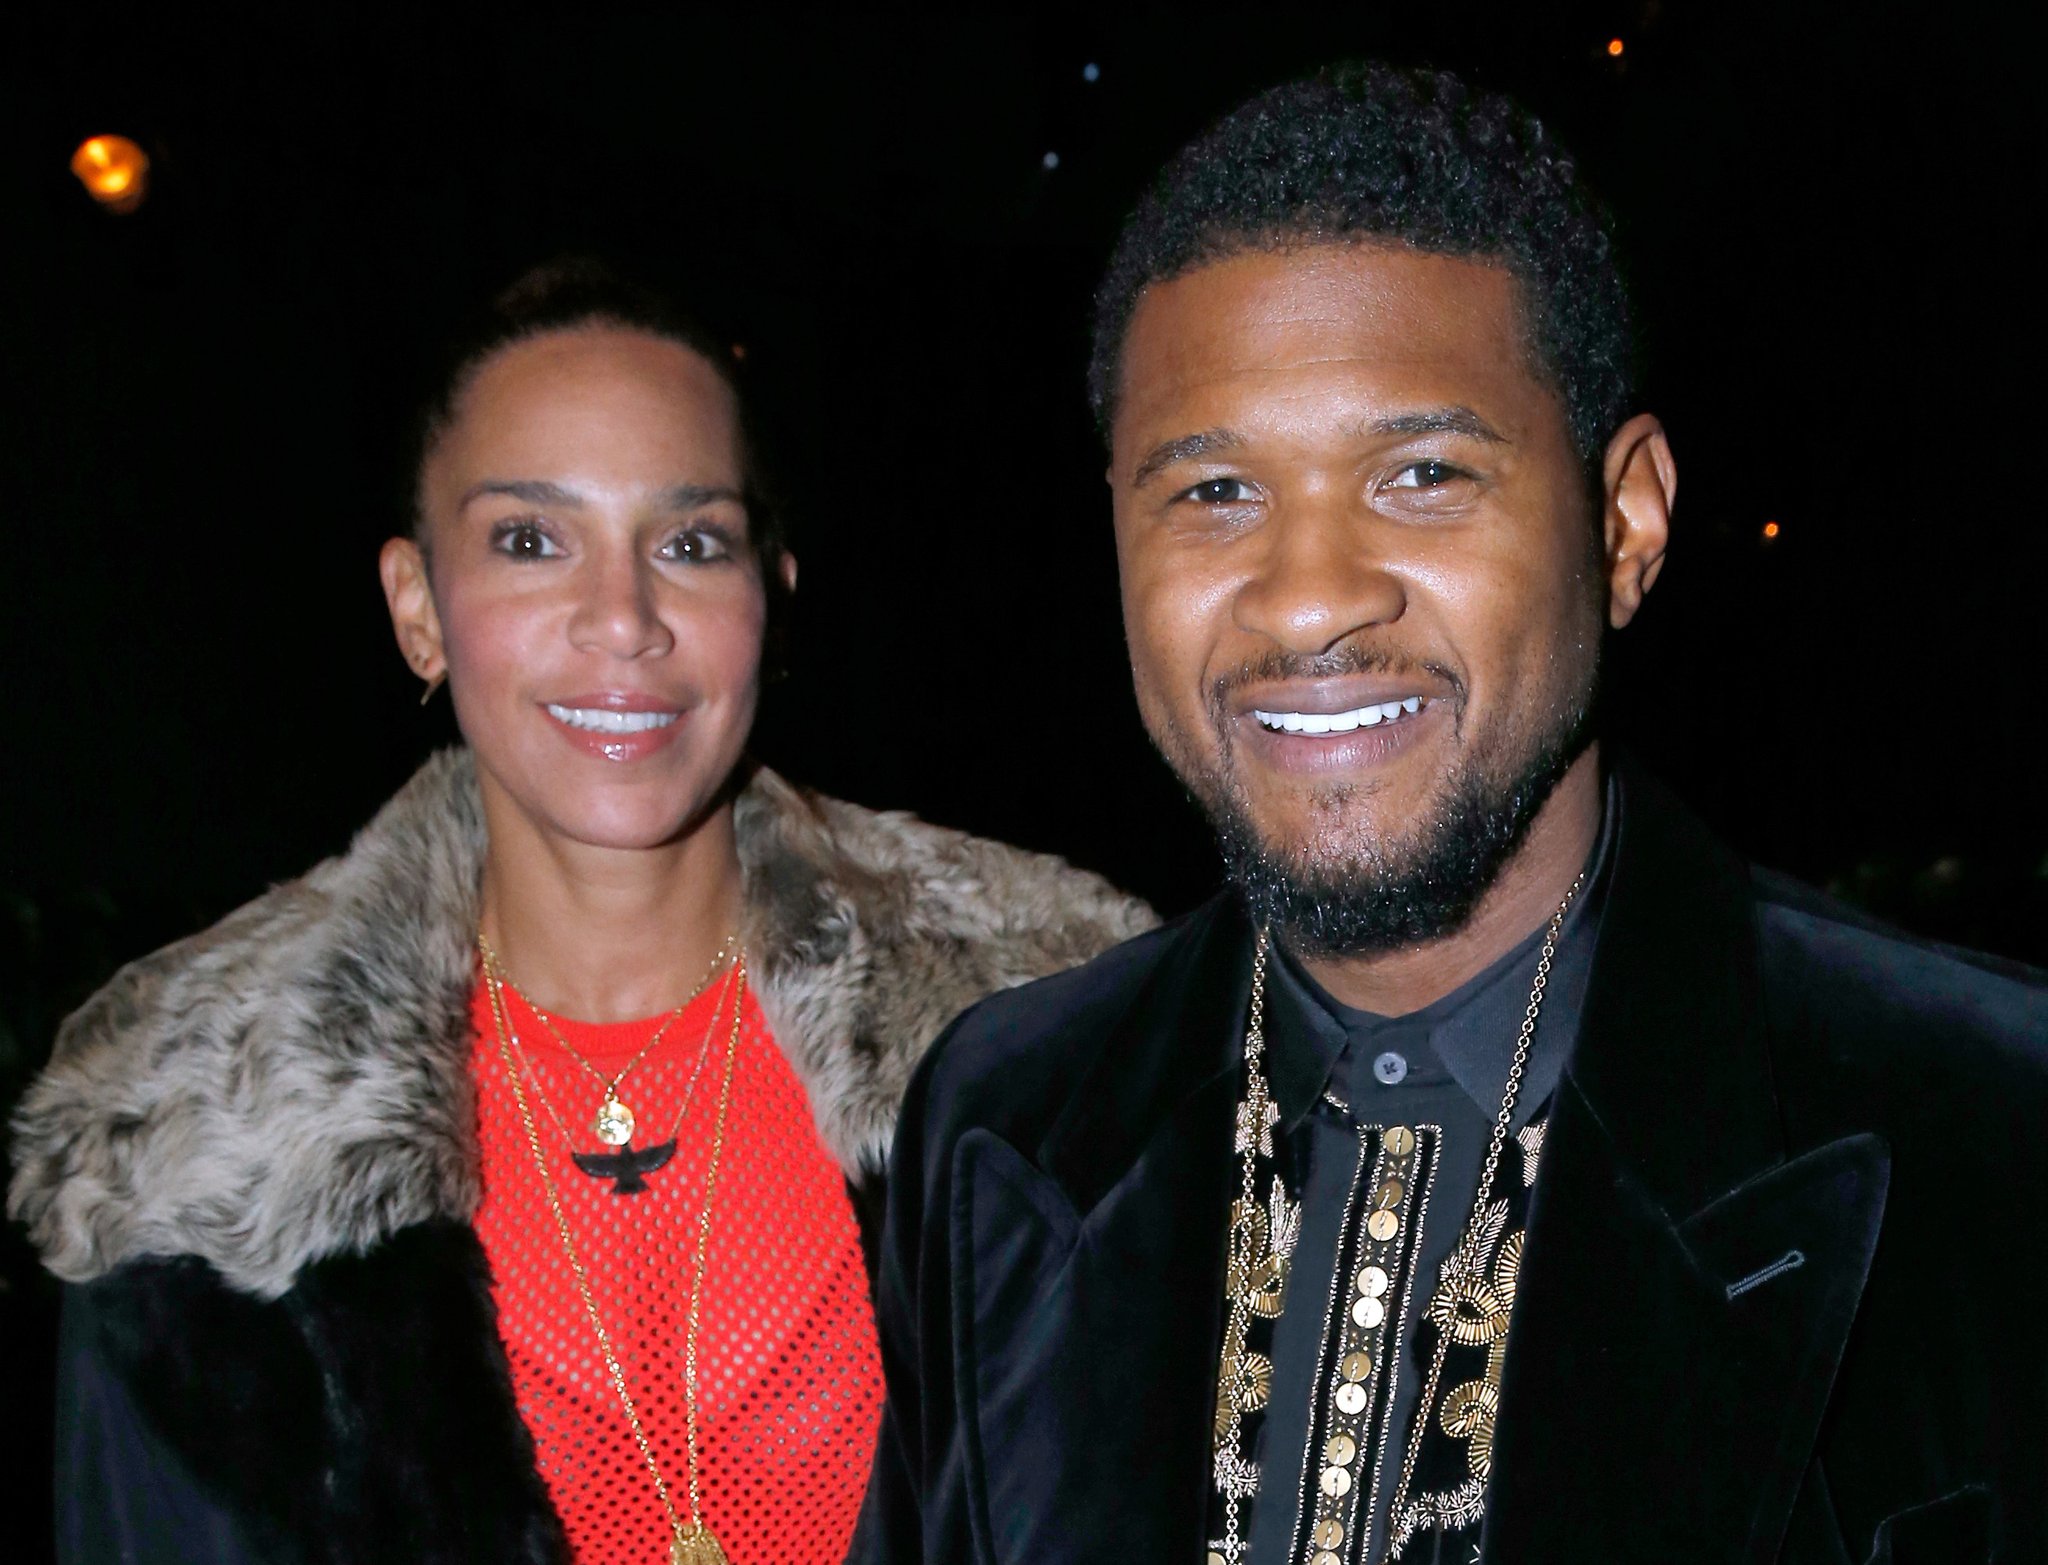 After Two Years Of Marriage, Usher And Wife Announce Separation